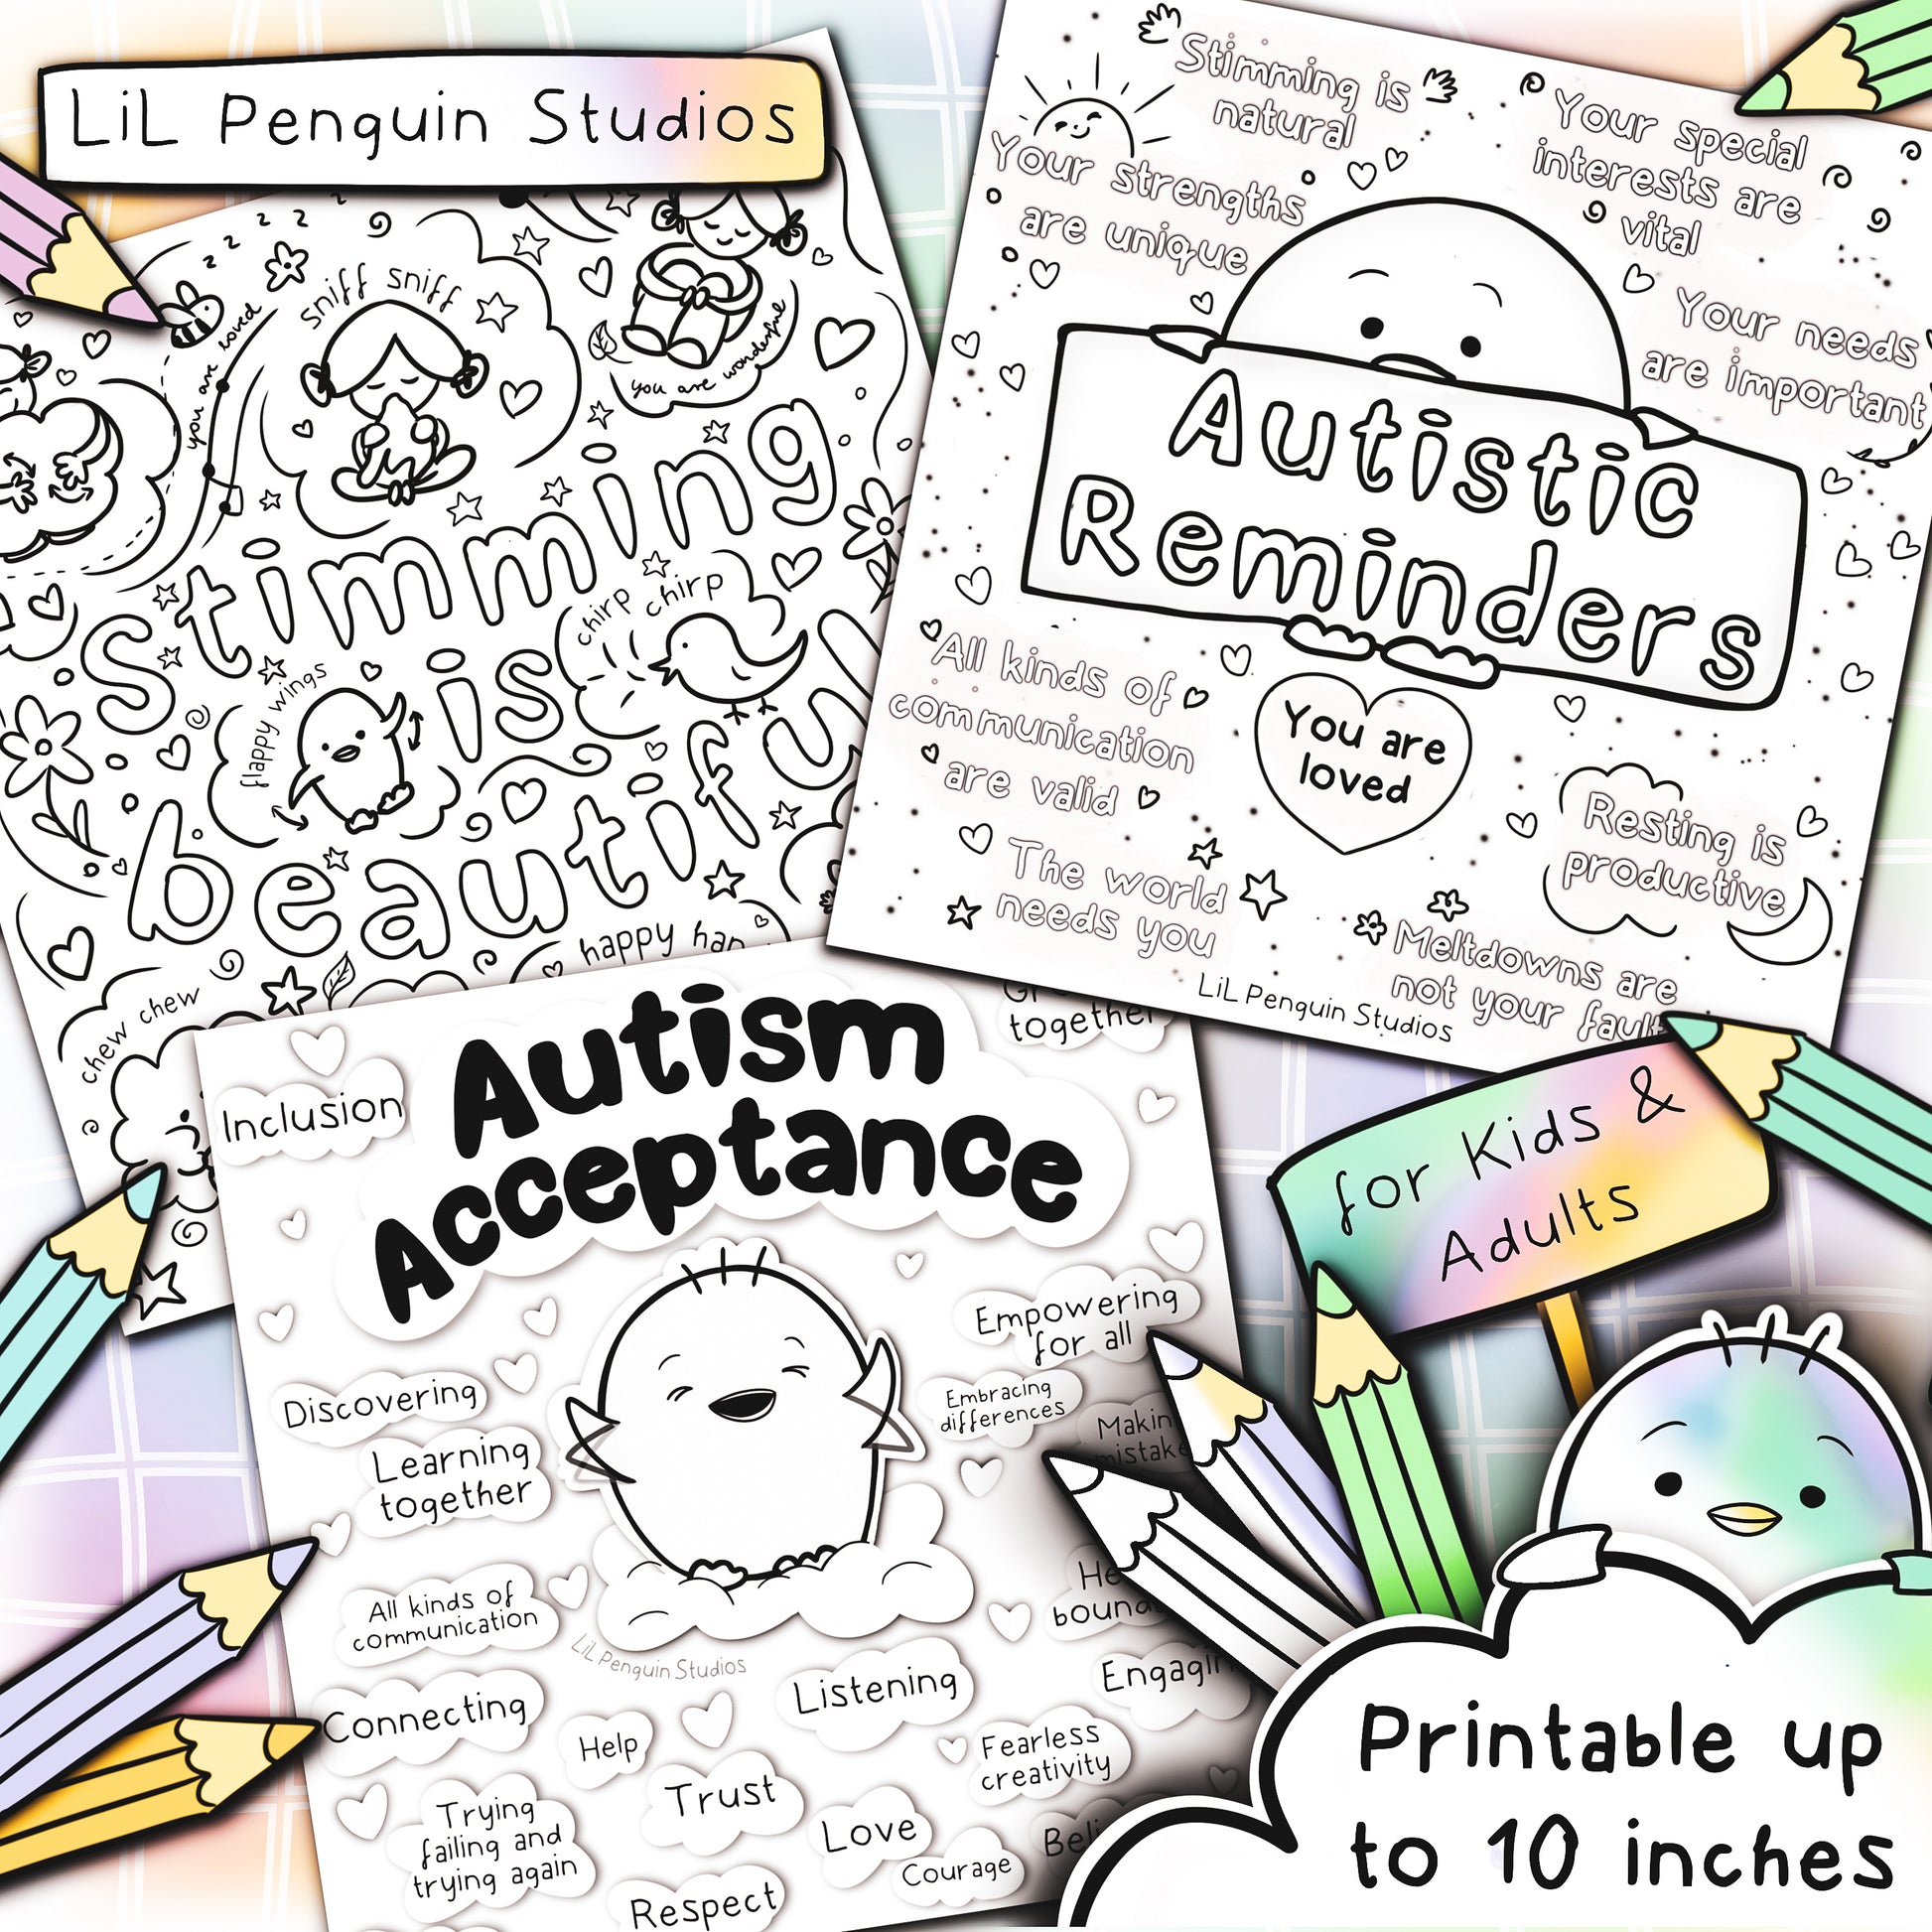 The Autism Coloring Book - Affirmations, reminders, self-love messages, and lots of cute drawings to color. Hand drawn by an autistic artist. Written and hand-drawn by an autistic artist (LiL Penguin Studios (autism_happy_plance on Instagram)